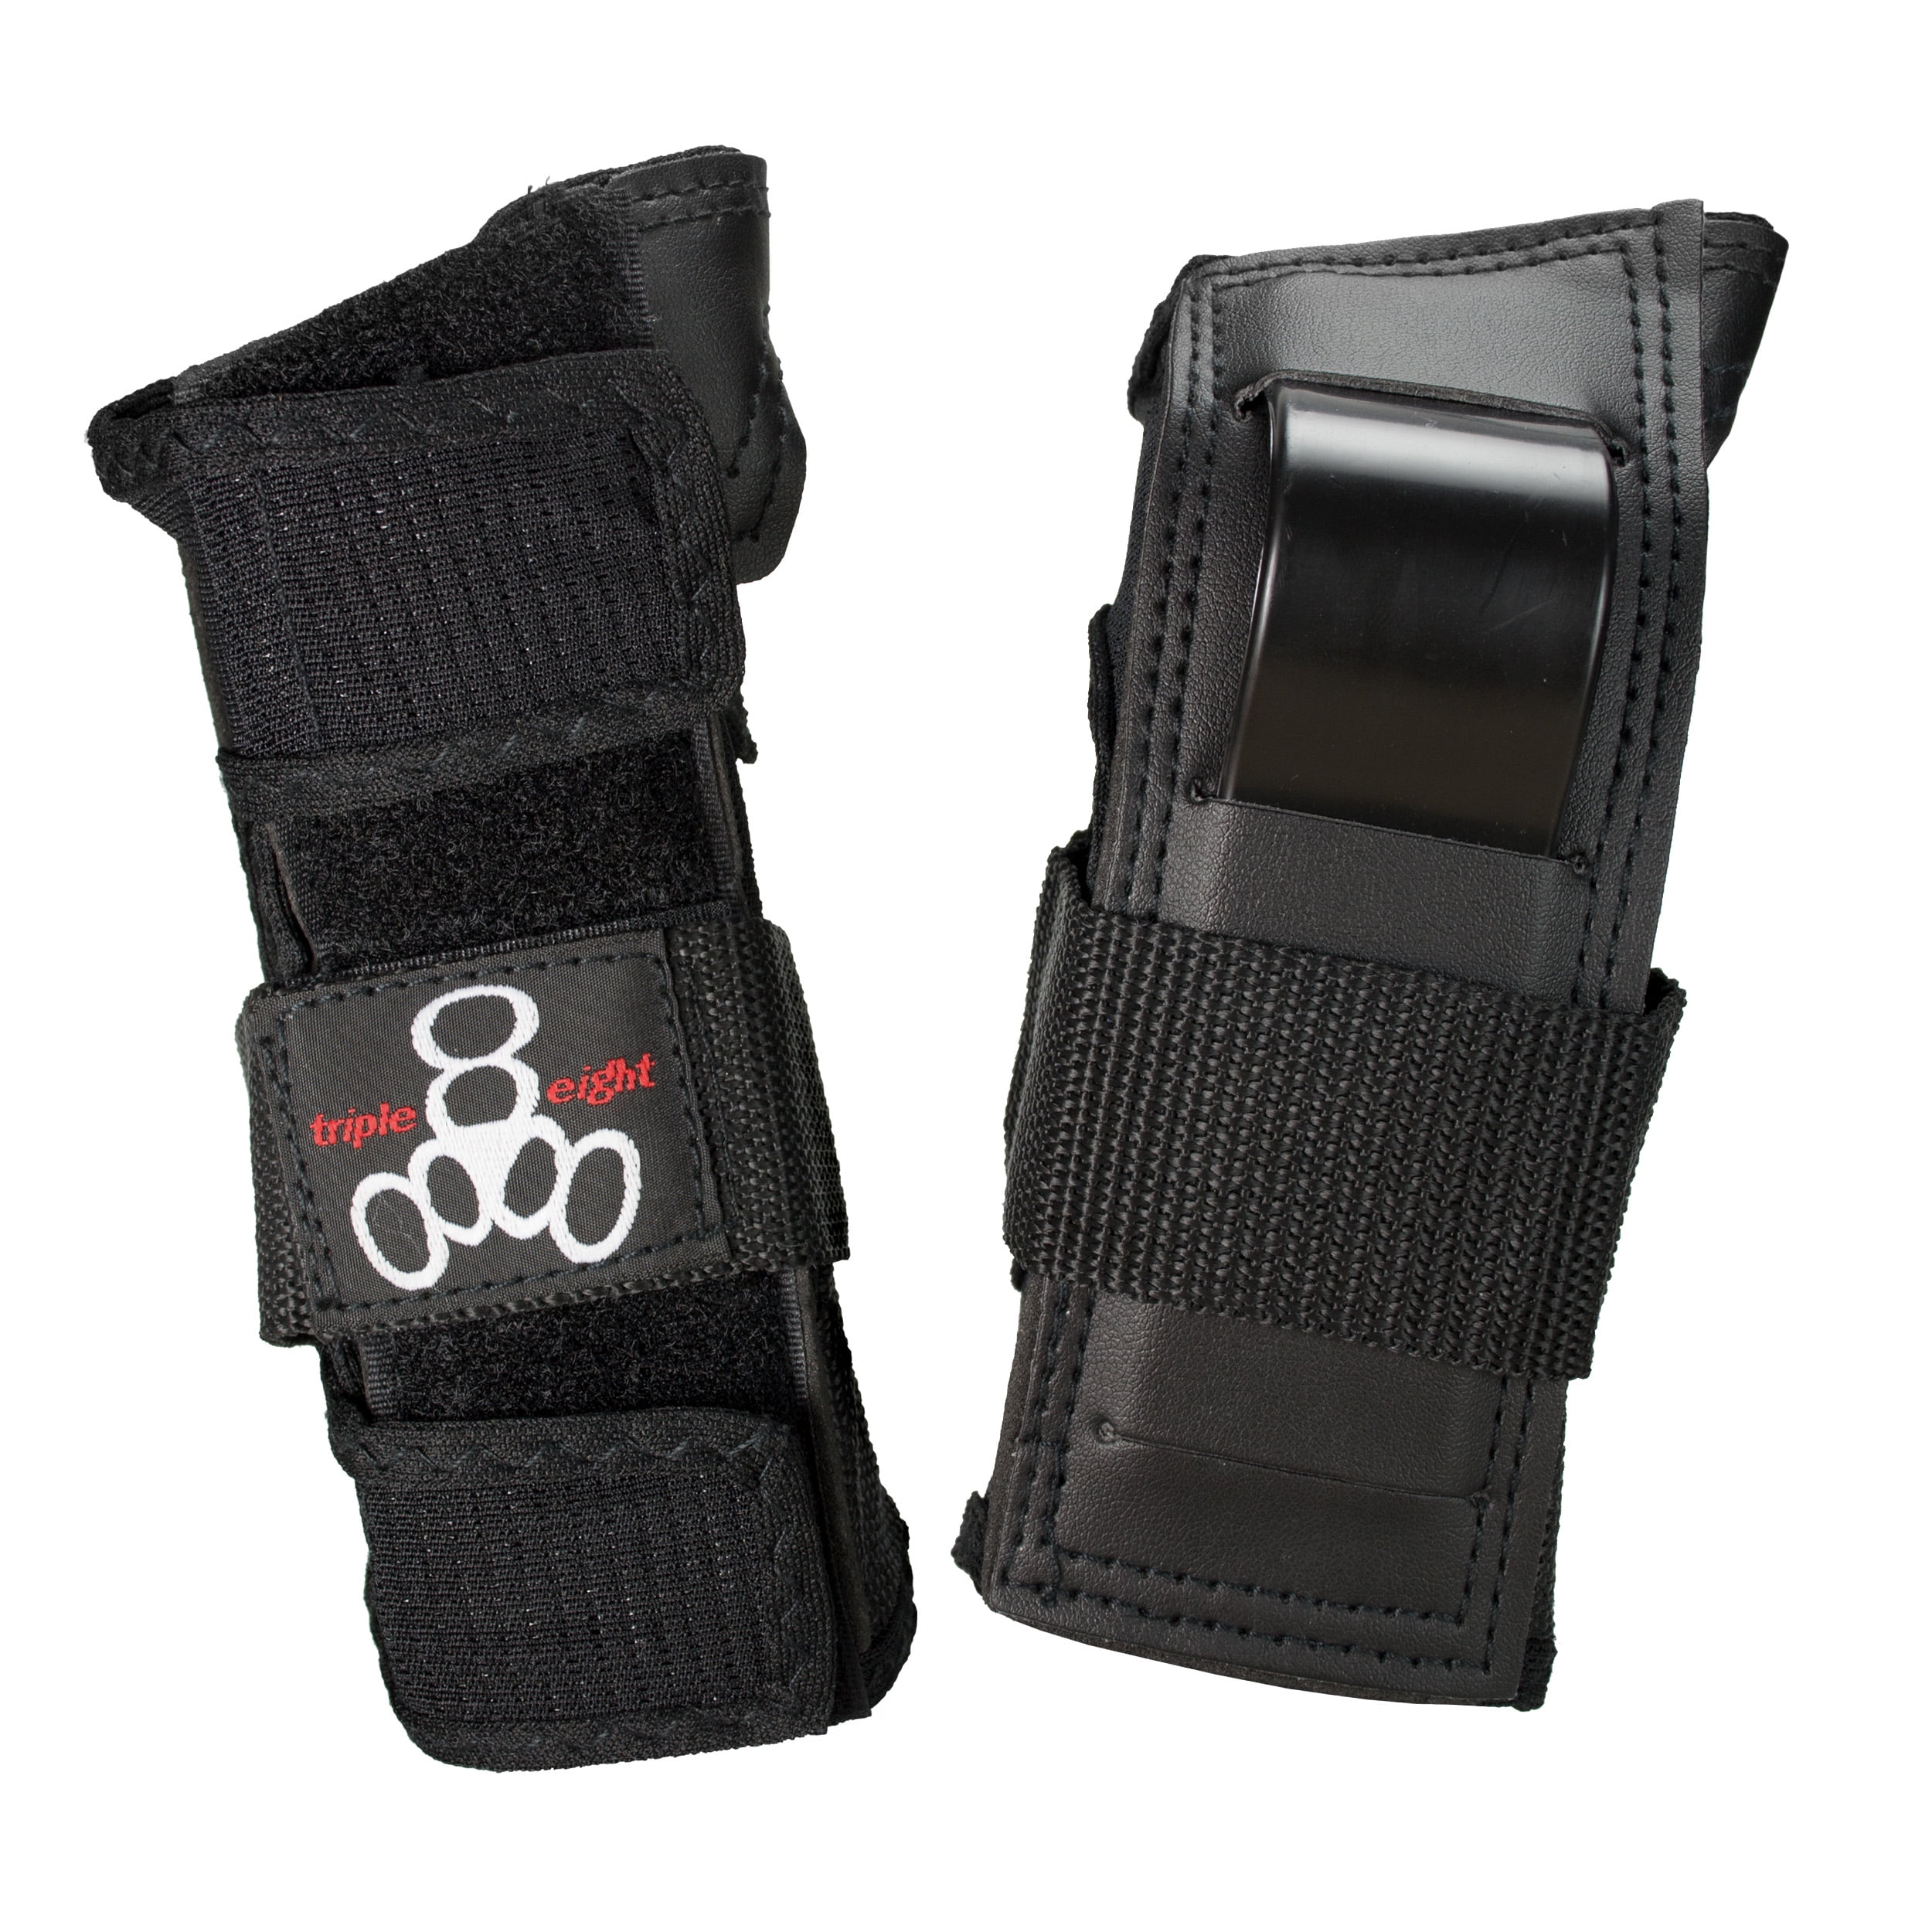 Snowboa Nocry Wrist Guards; Wrist Support and Protective Gear for Skateboarding 